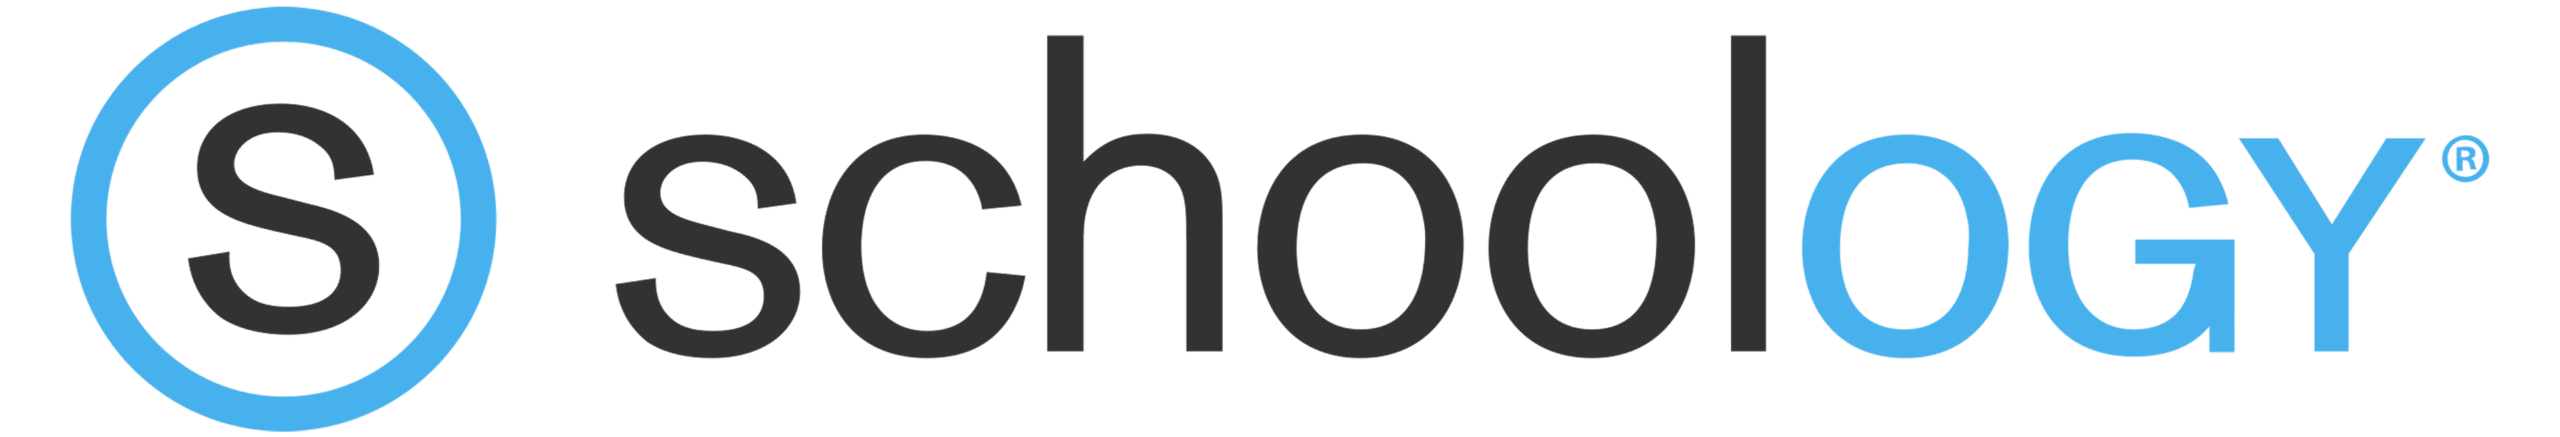 Schoology-Logo-cropped